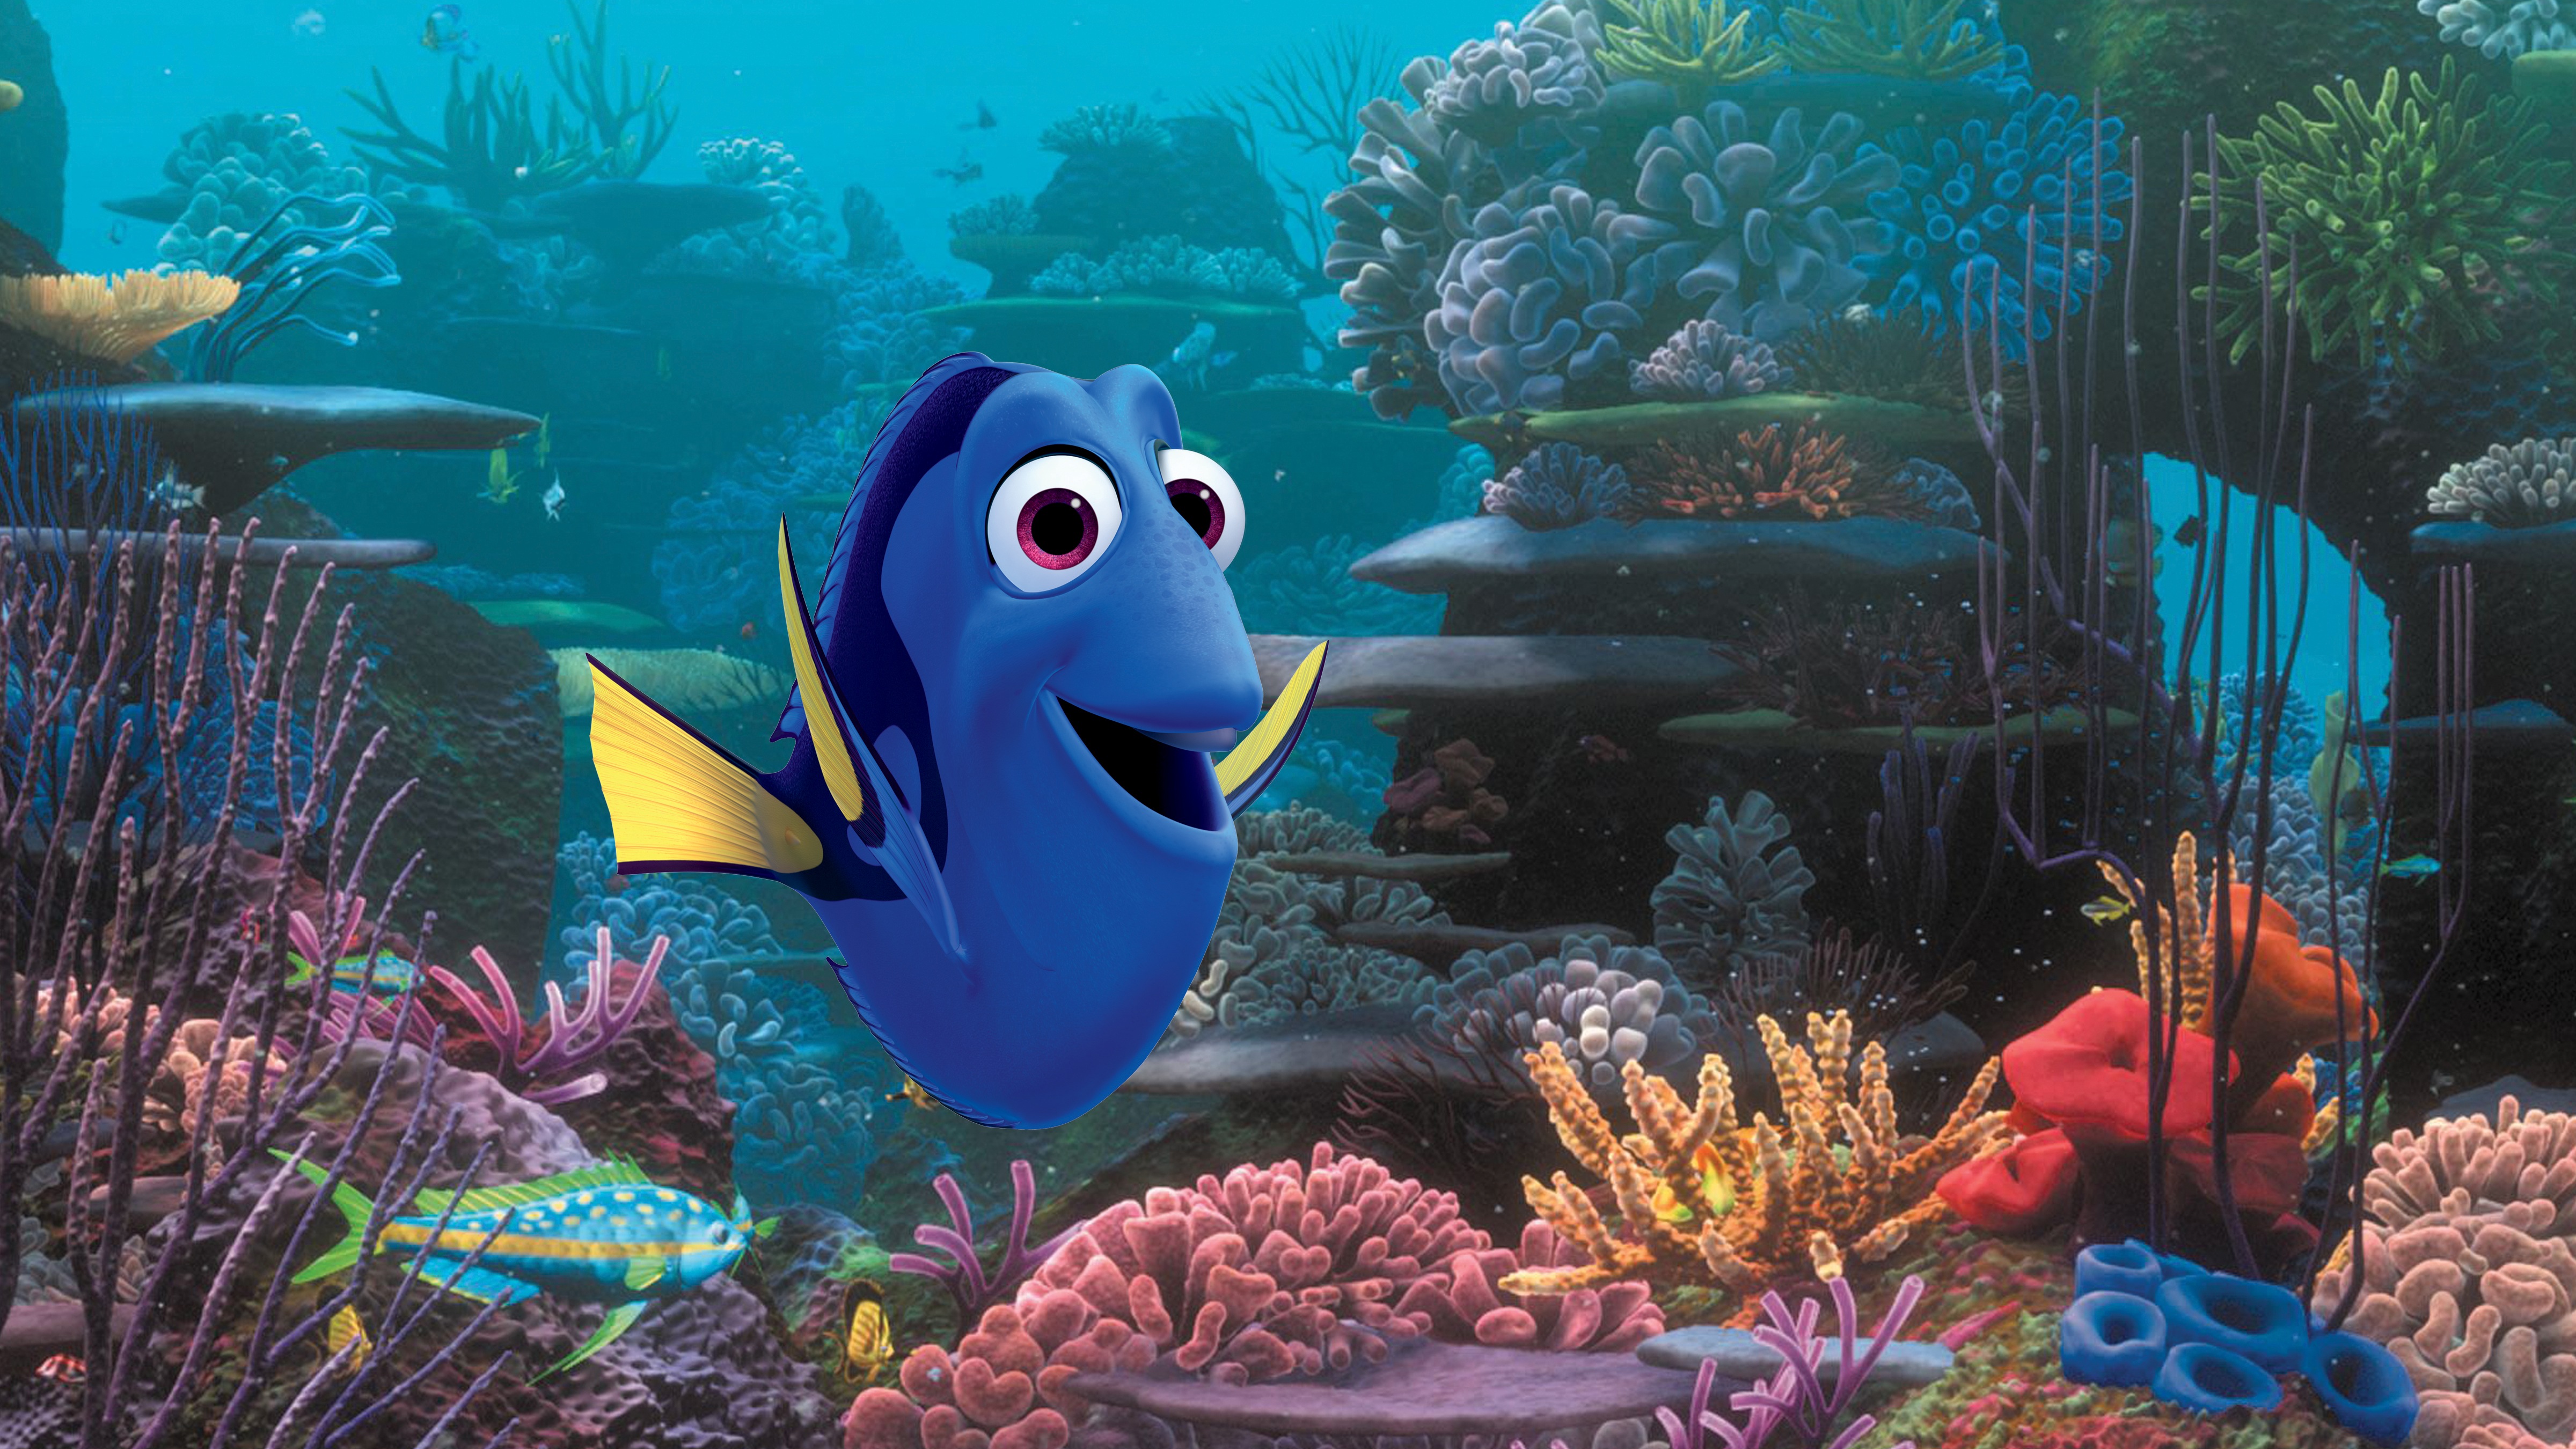 This image released by Disney shows the character Dory, voiced by Ellen DeGeneres, in a scene from "Finding Dory." The Pixar sequel far-surpassed the already Ocean-sized expectations to take in $136.2 million, according to comScore estimates Sunday, June 19, 2016. (Pixar/Disney via AP)